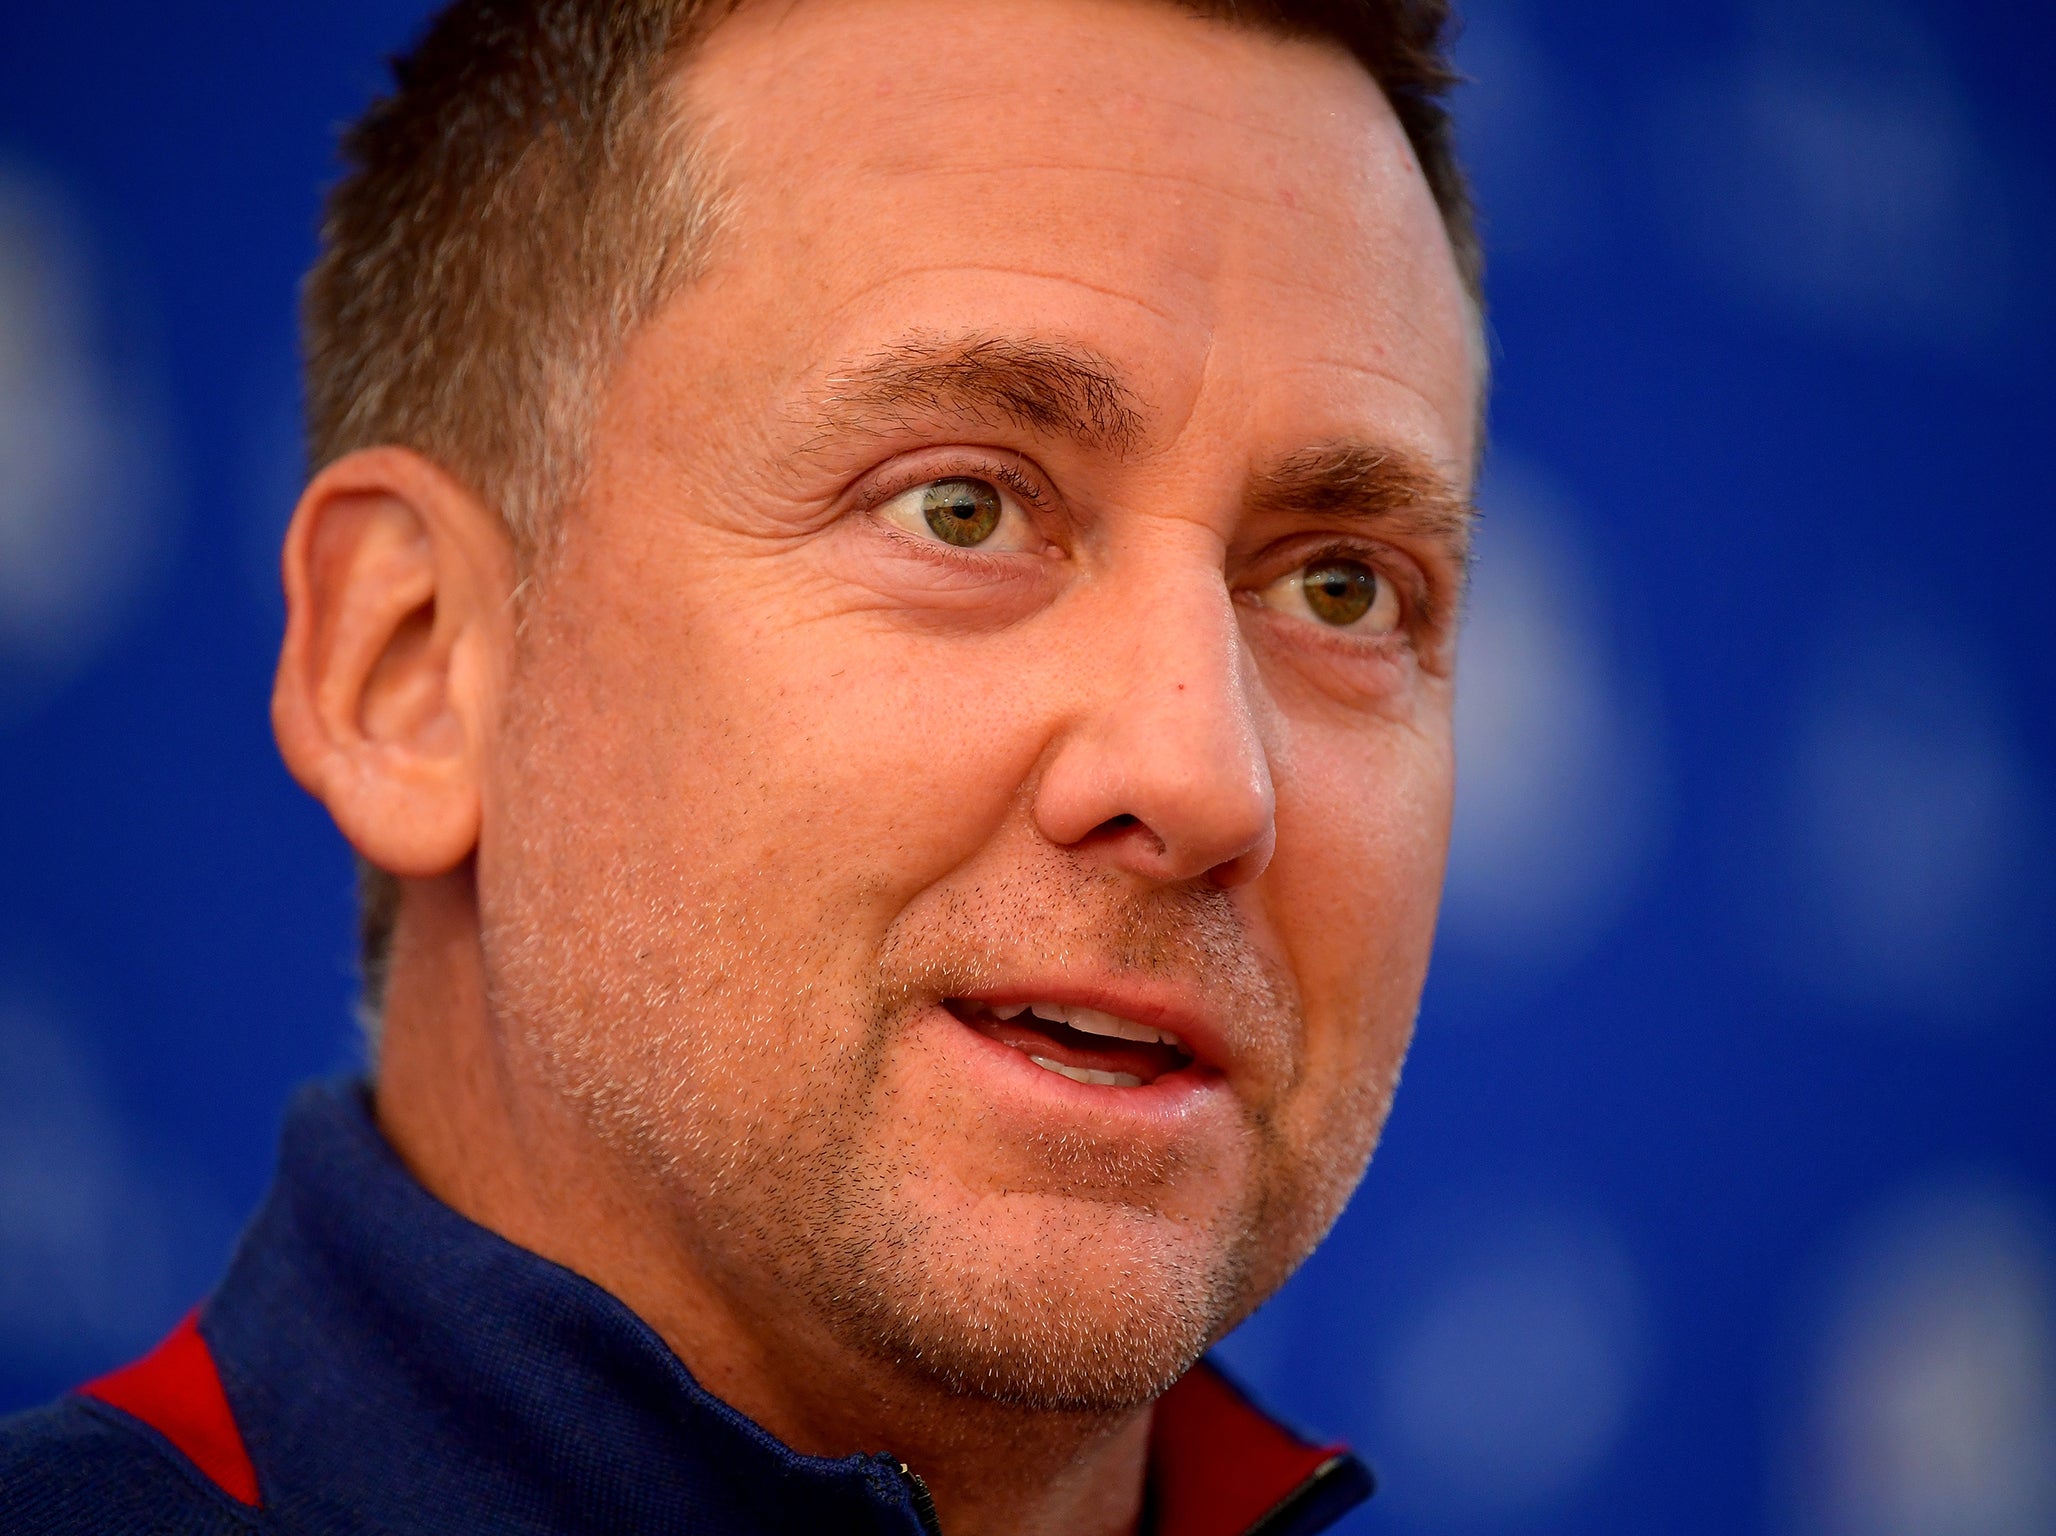 Ian Poulter is a Ryder Cup veteran